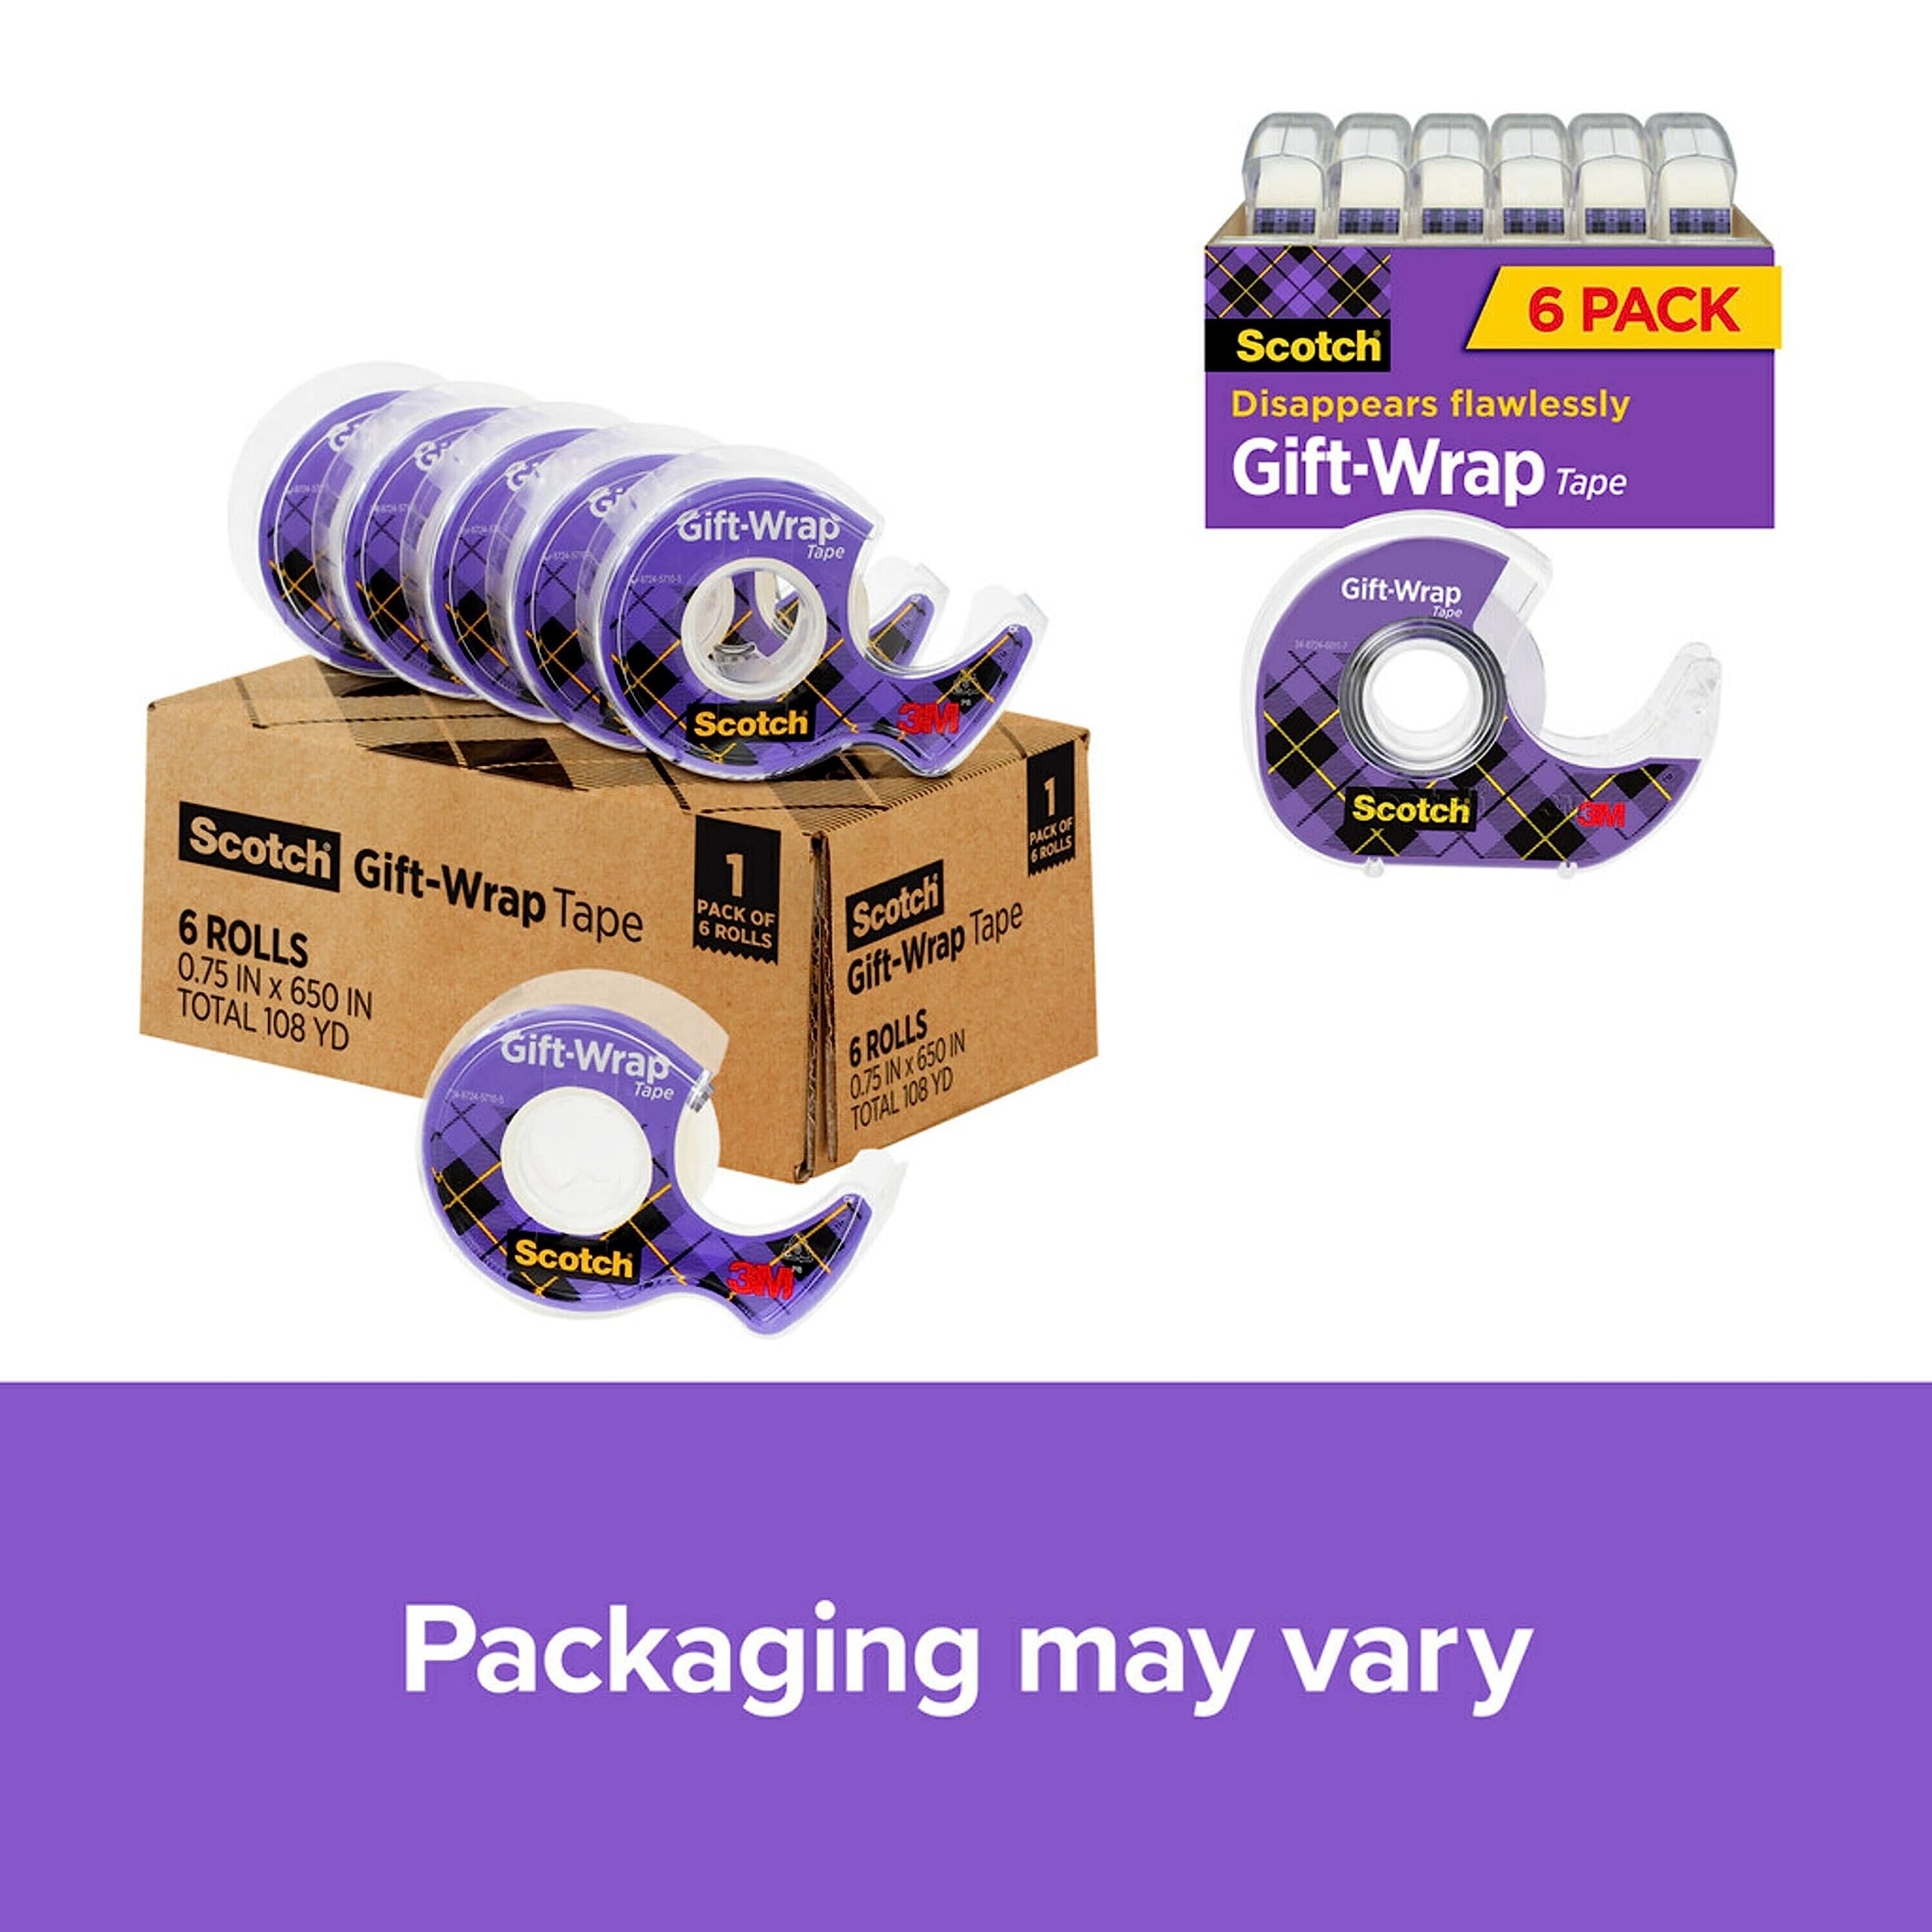 Scotch Gift-Wrap Tape, 3/4 in x 650 in, 6 Dispensers/Pack